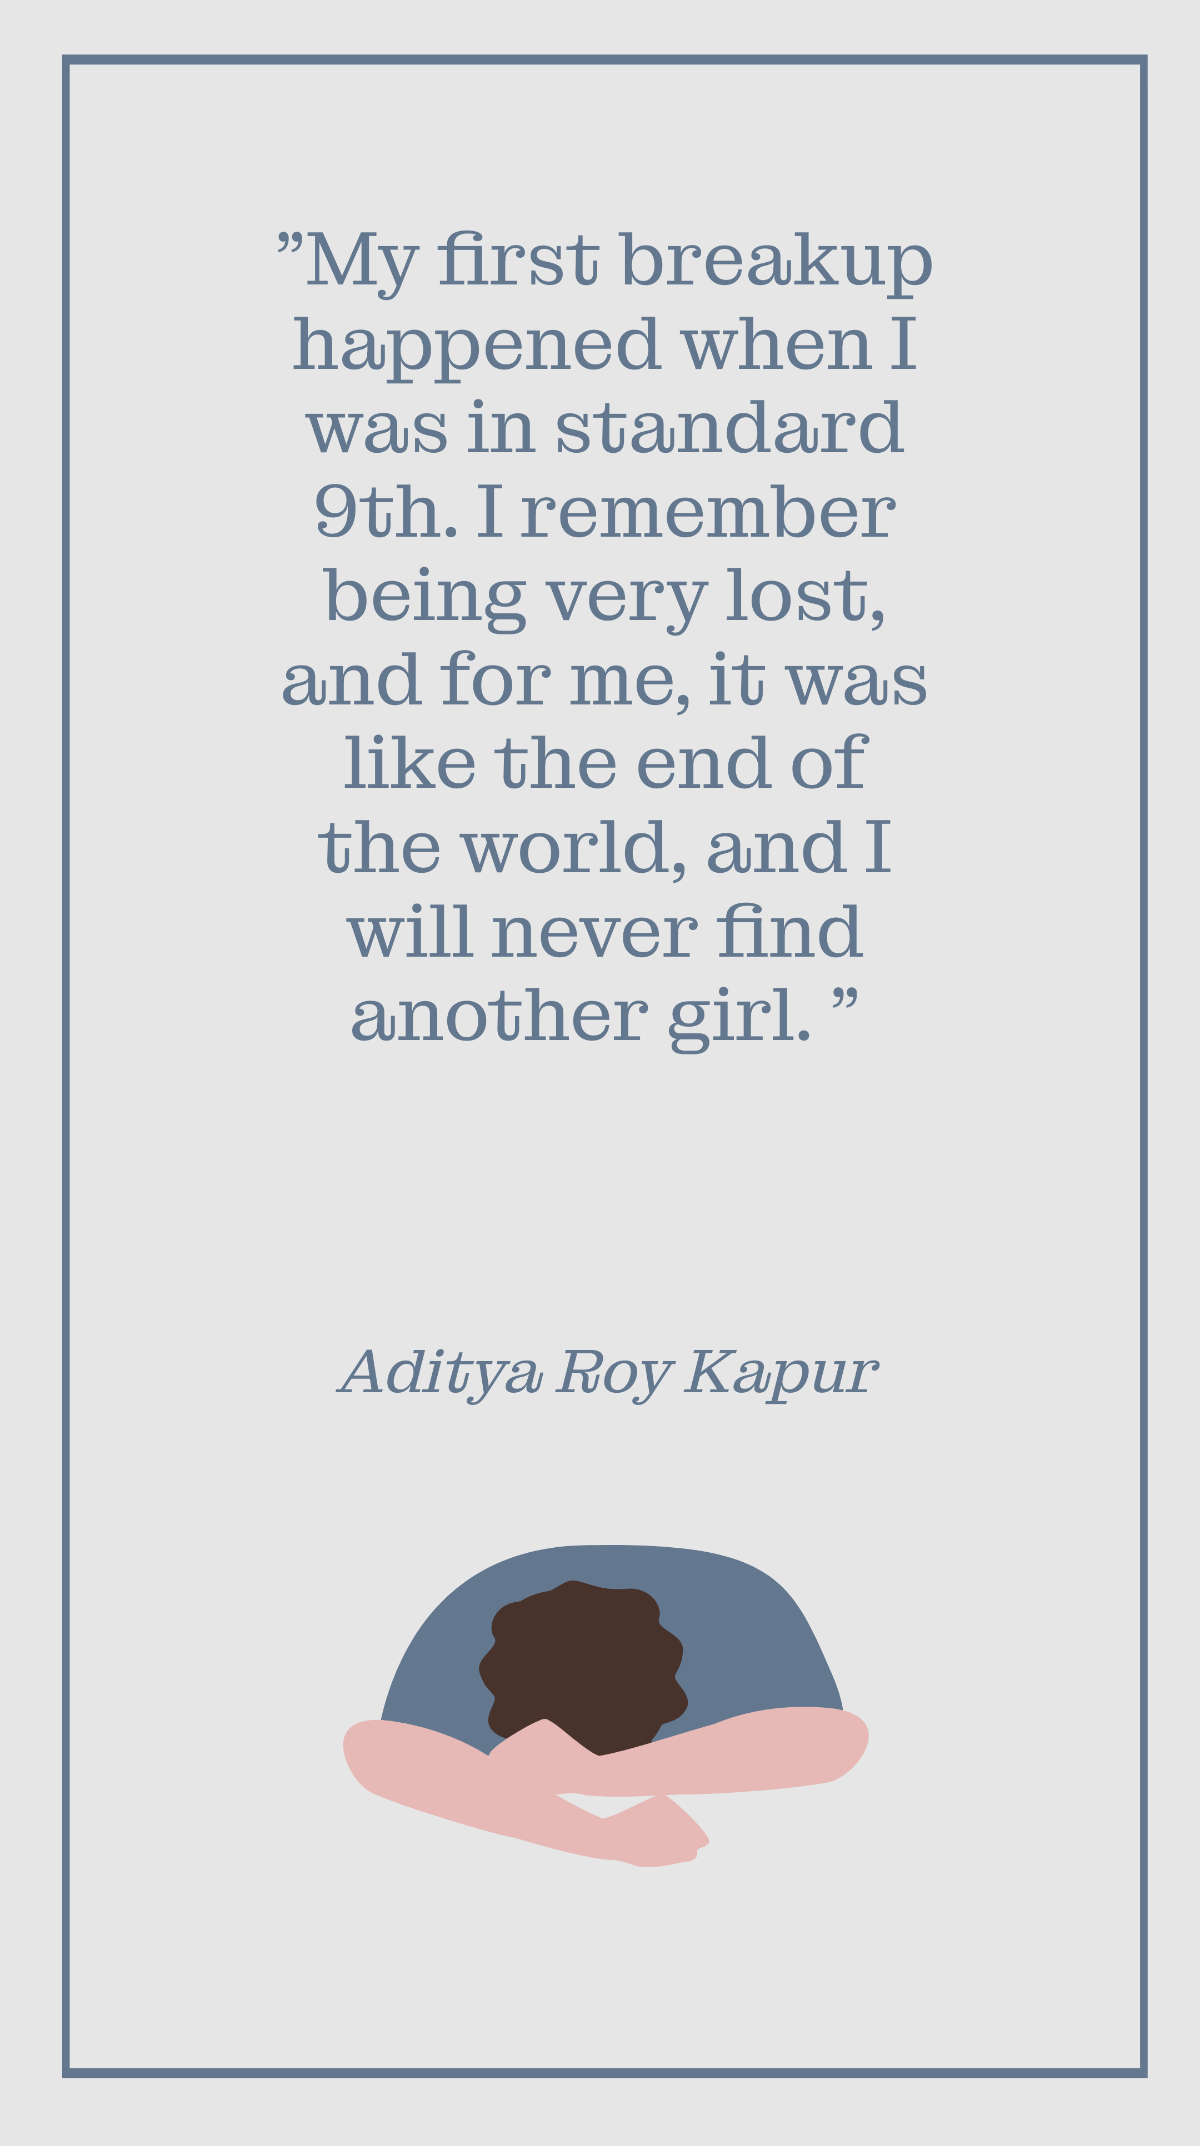 Free Aditya Roy Kapur - My first breakup happened when I was in standard 9th. I remember being very lost, and for me, it was like the end of the world, and I will never find another girl. Template